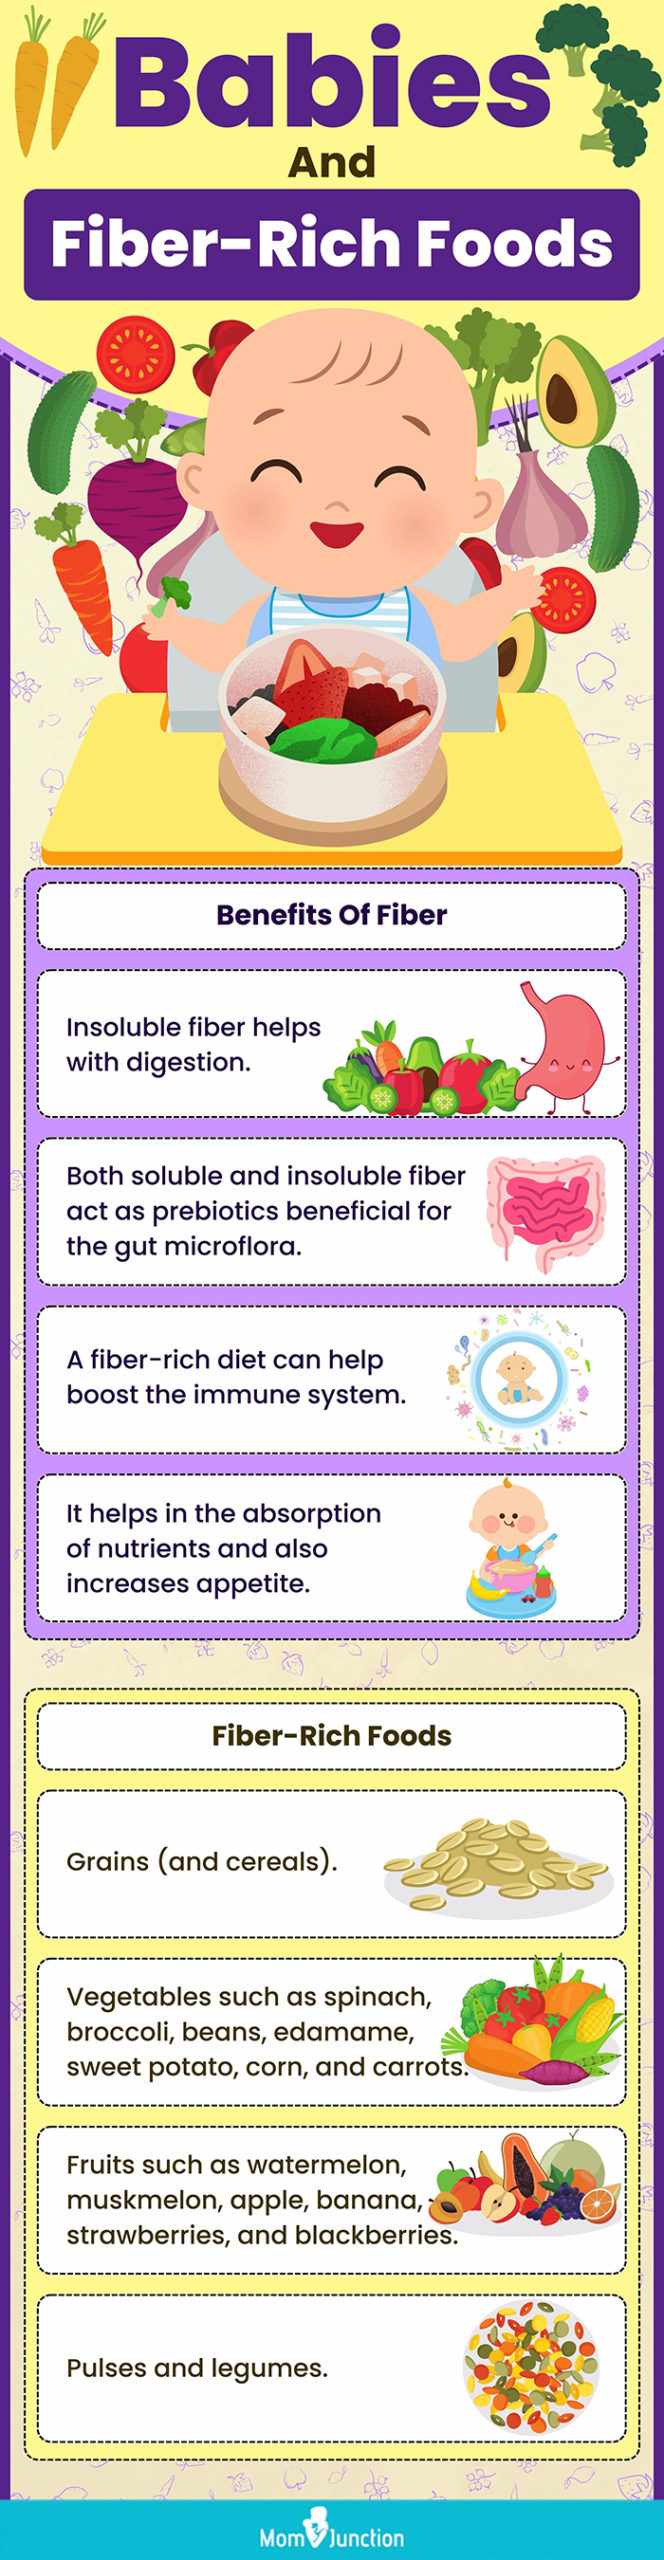 babies and fiber rich foods (infographic)